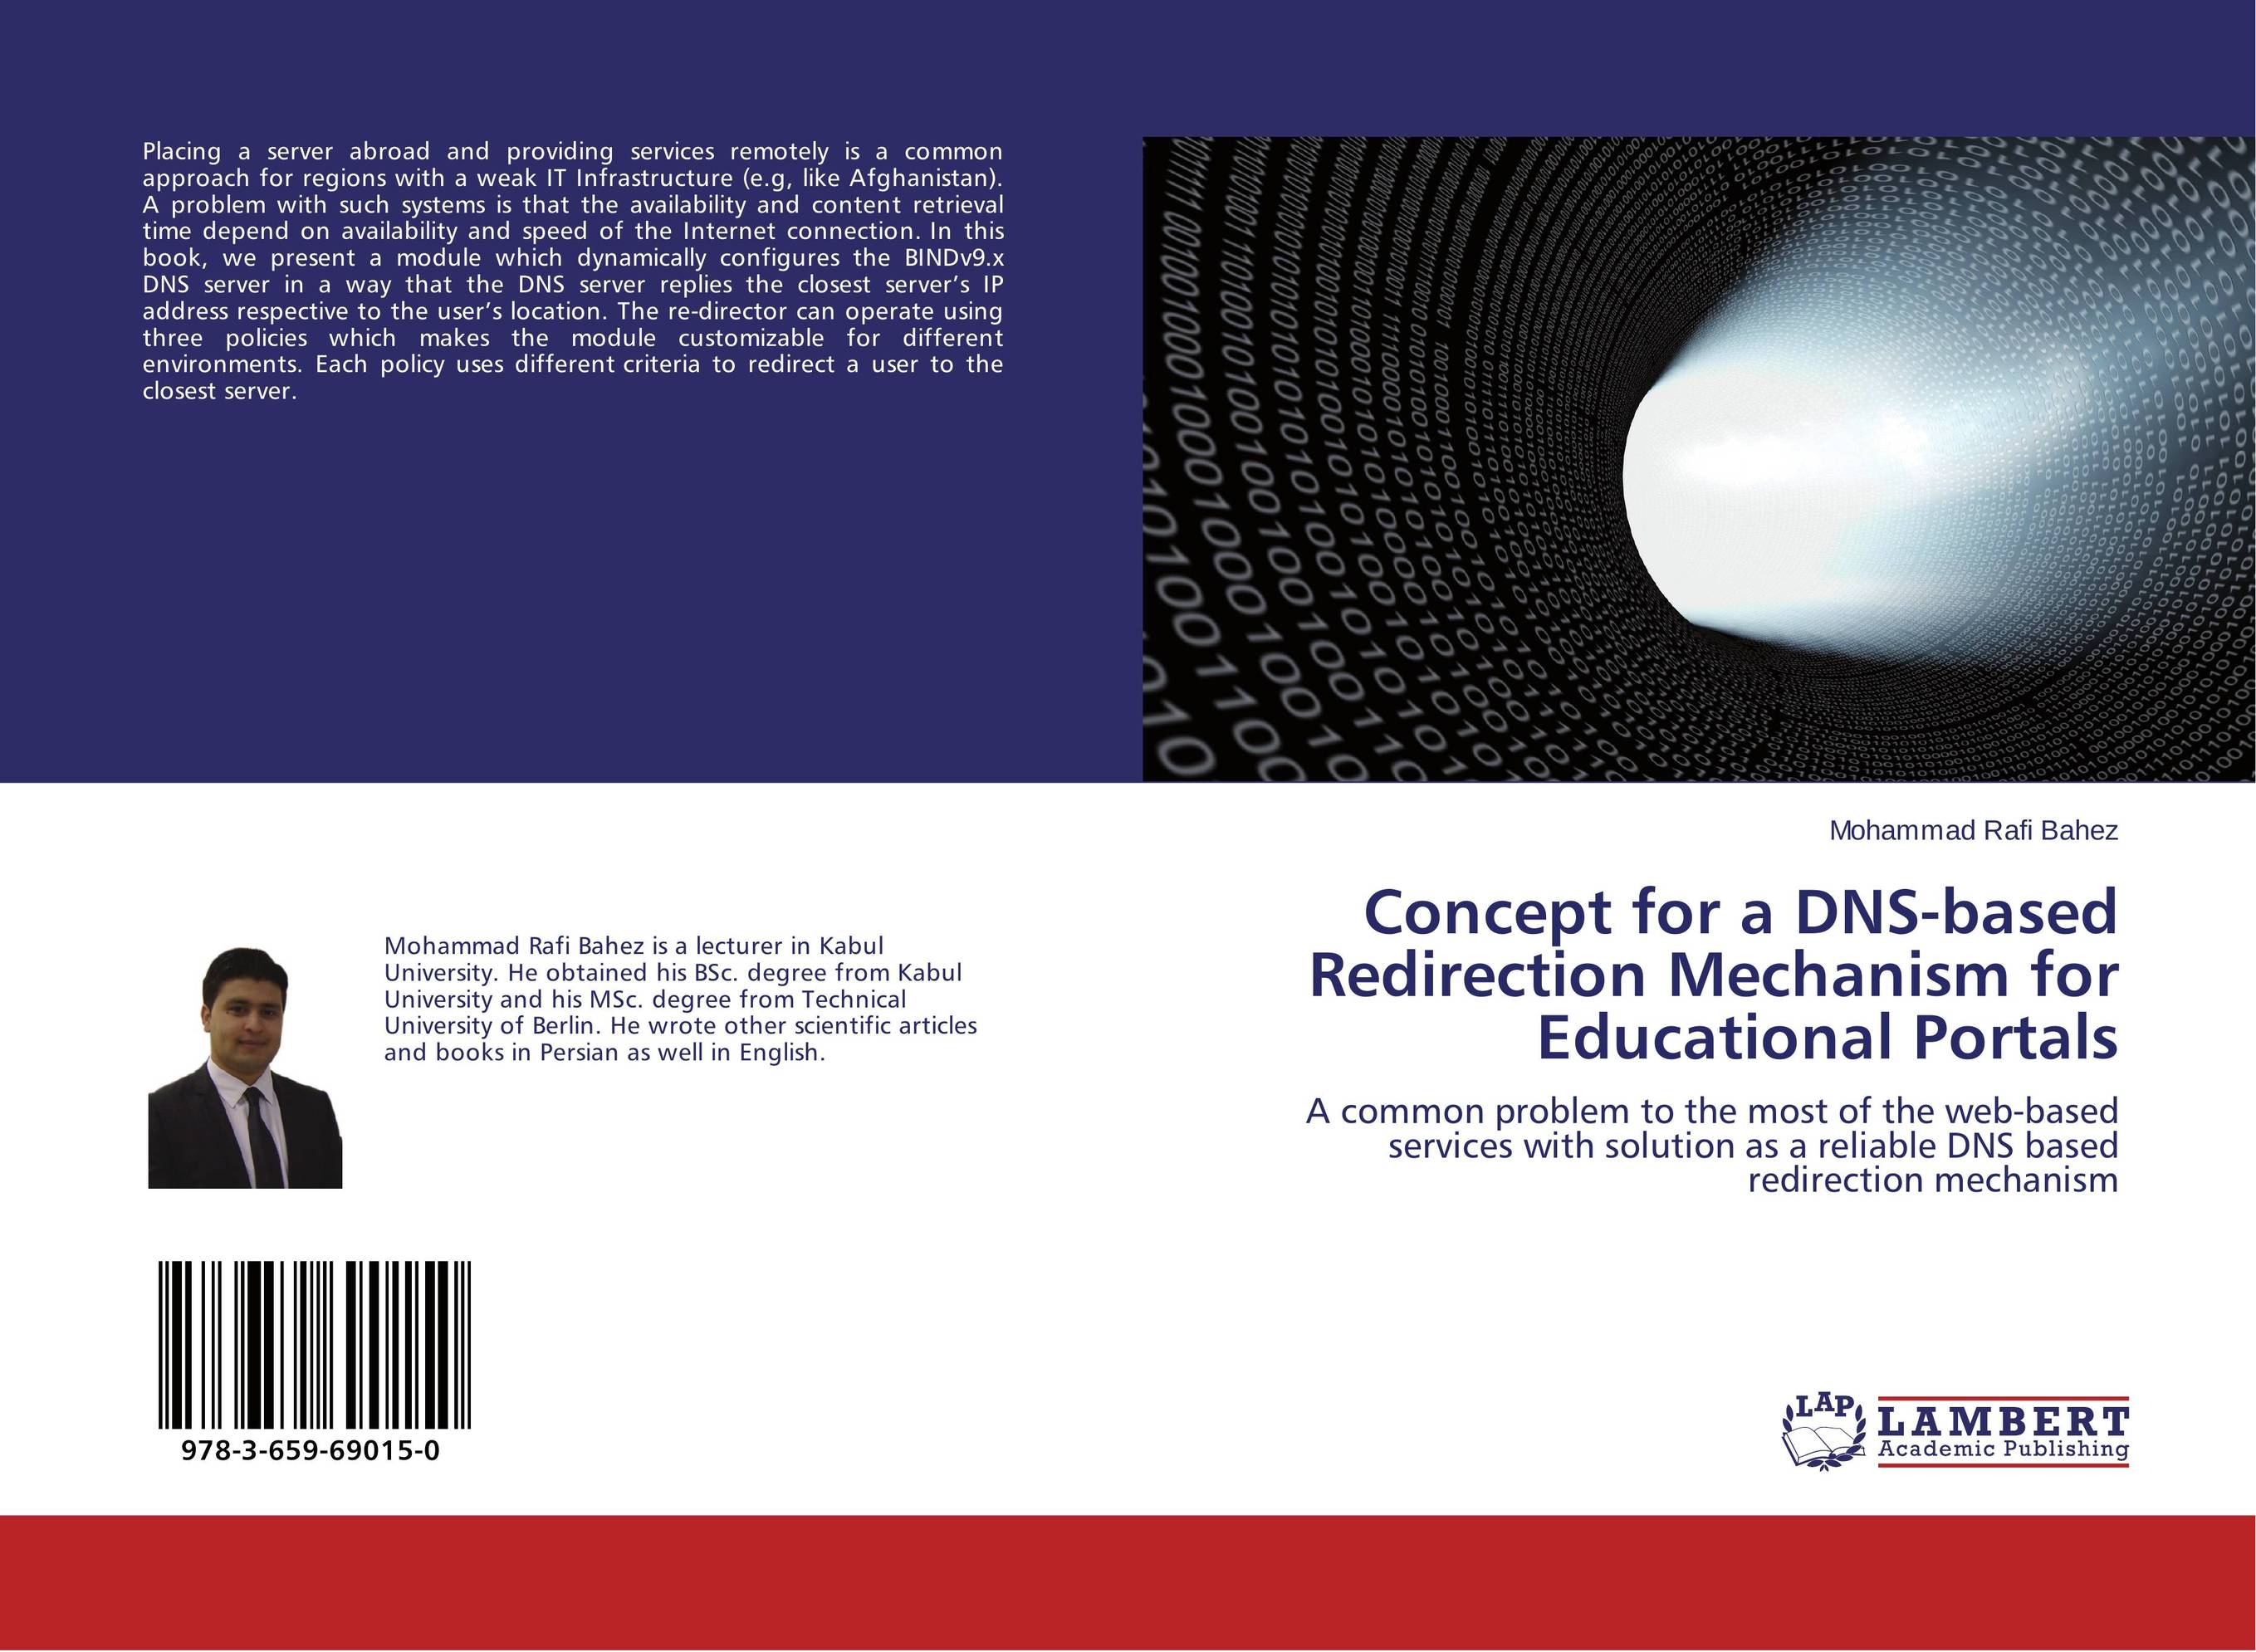 Concept for a DNS-based Redirection Mechanism for Educational Portals